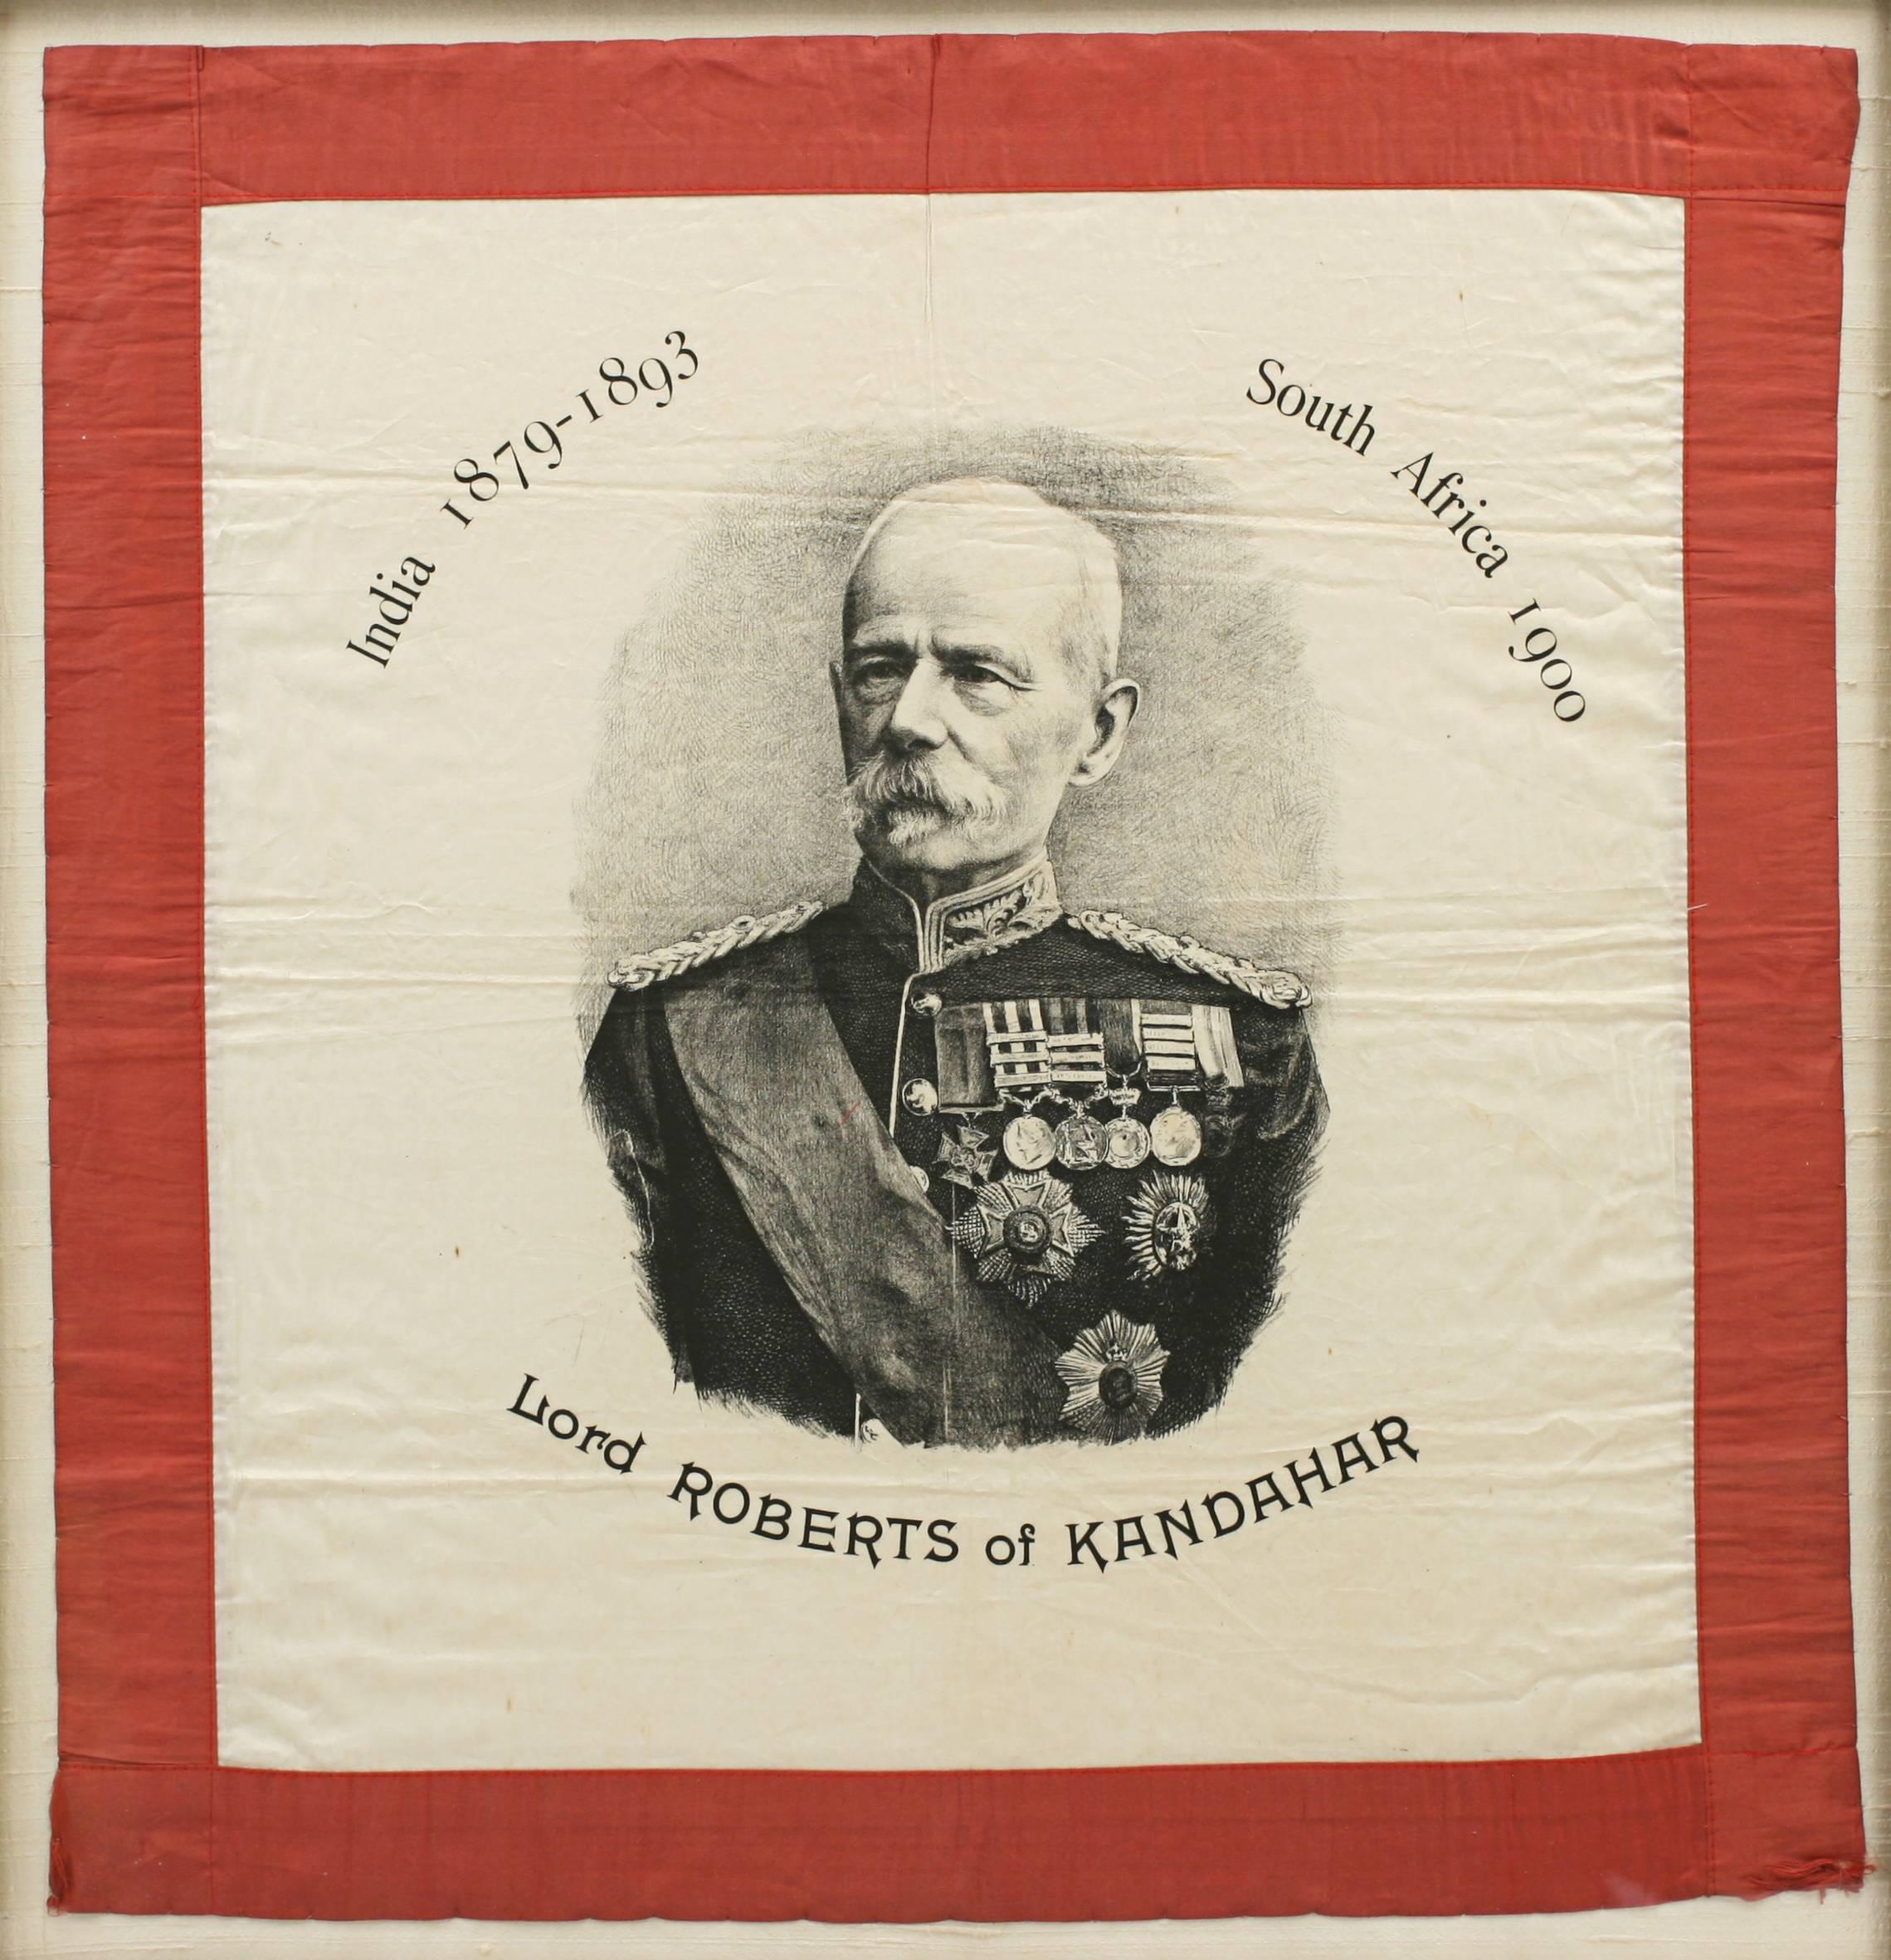 Lord Roberts of Kandahar silk handkerchief.
This wonderful souvenir handkerchief has been newly framed in a shadow box frame and is mounted onto a linen background. The handkerchief is printed with an image of Lord Roberts of Kandahar in his